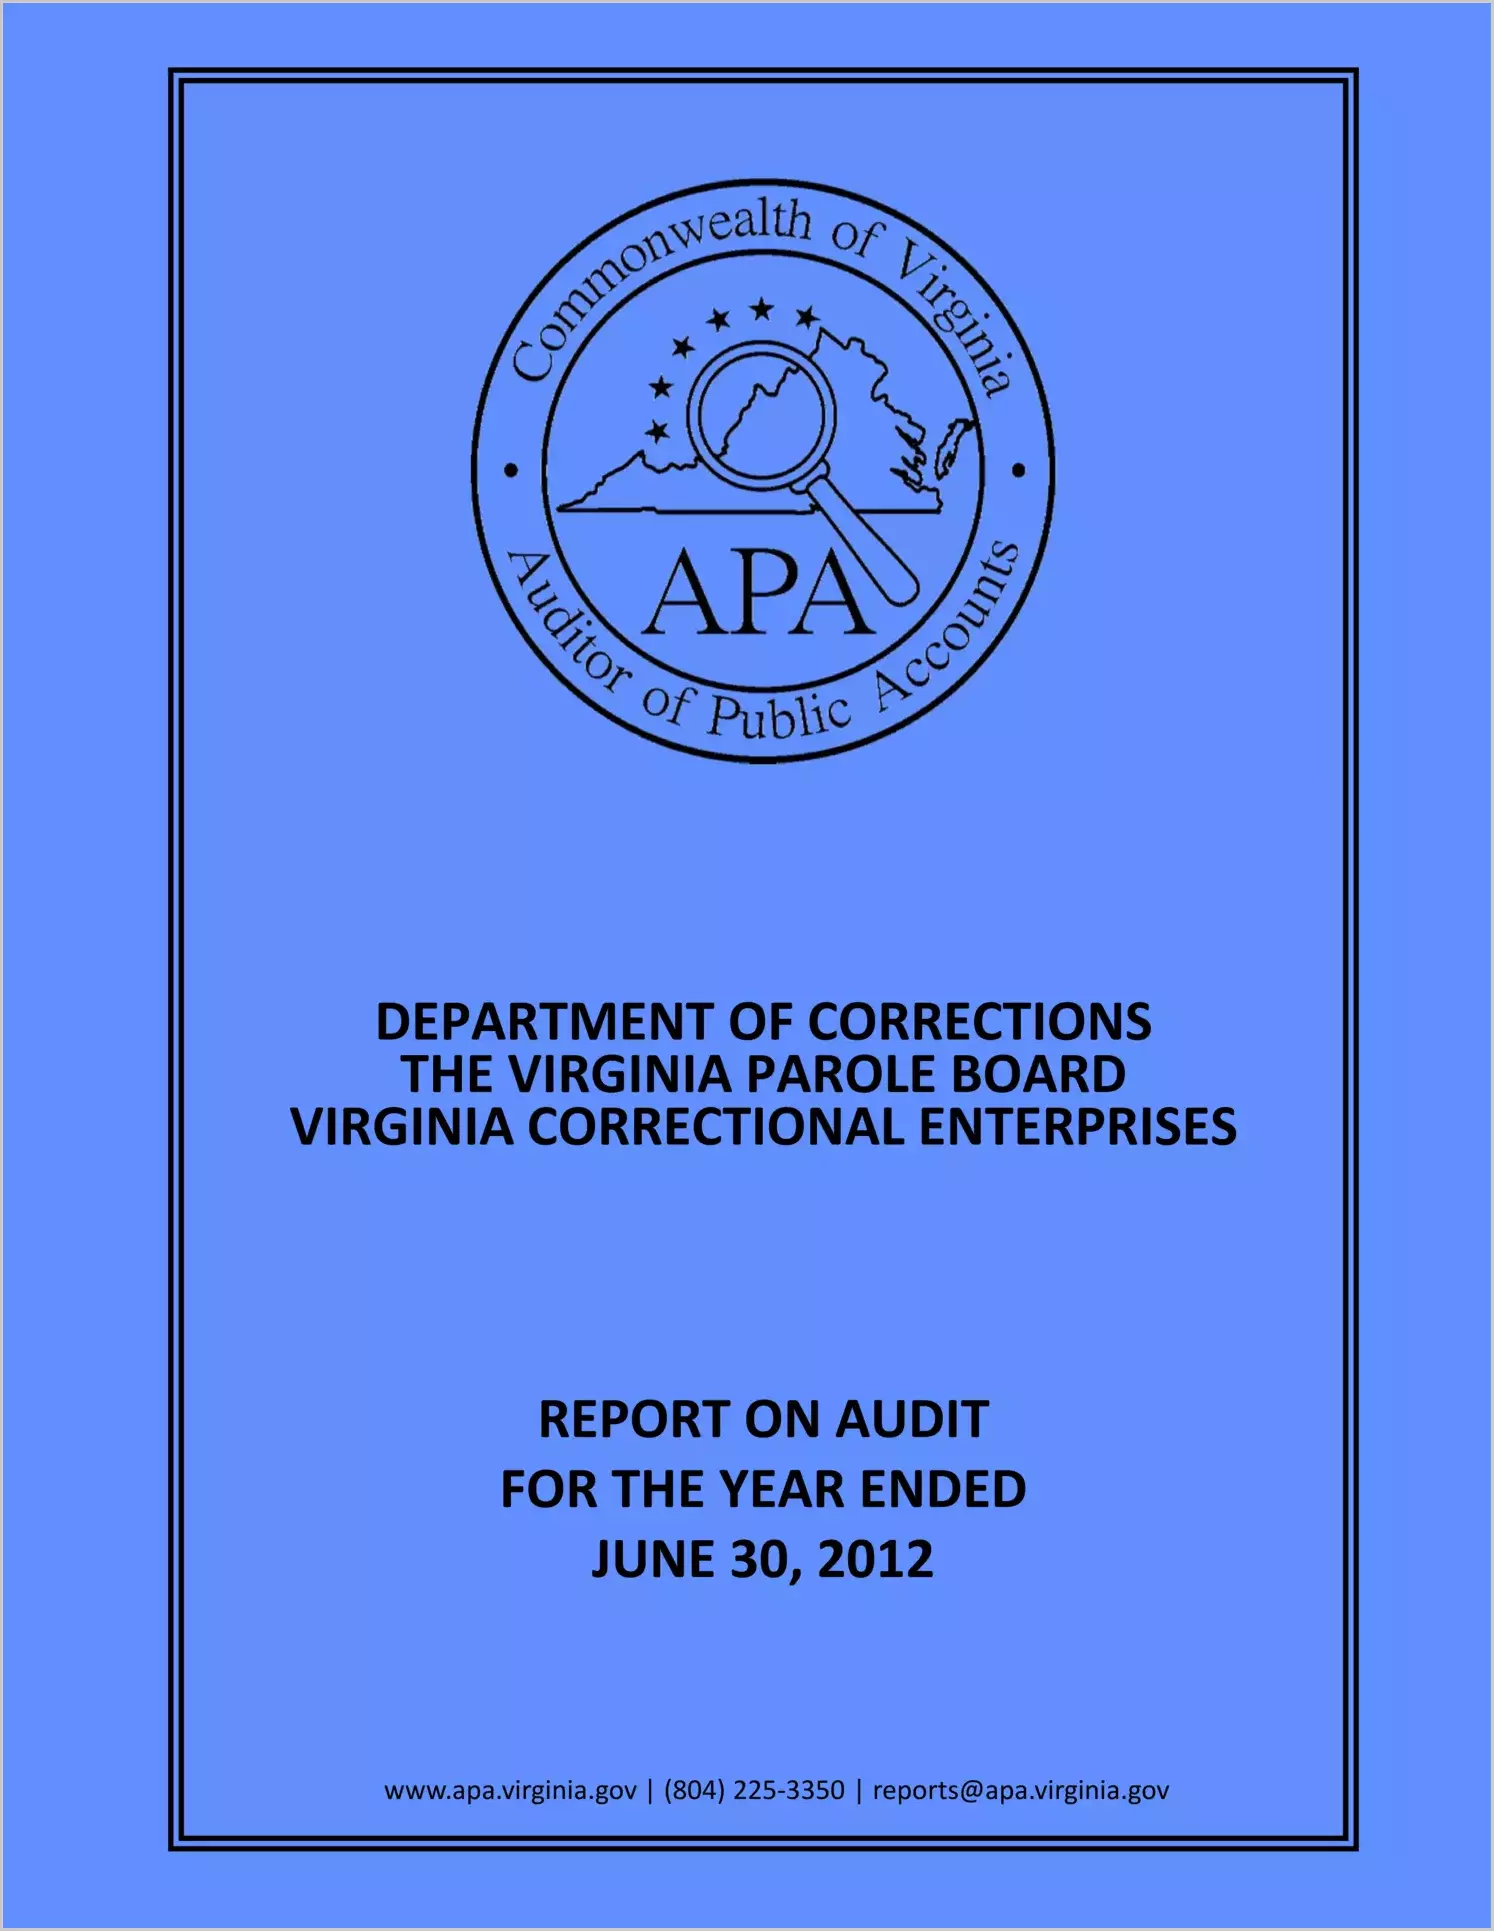 Department of Corrections, Virginia Parole Board and Virginia Correctional Enterprises report on audit for the year ended June 30, 2012